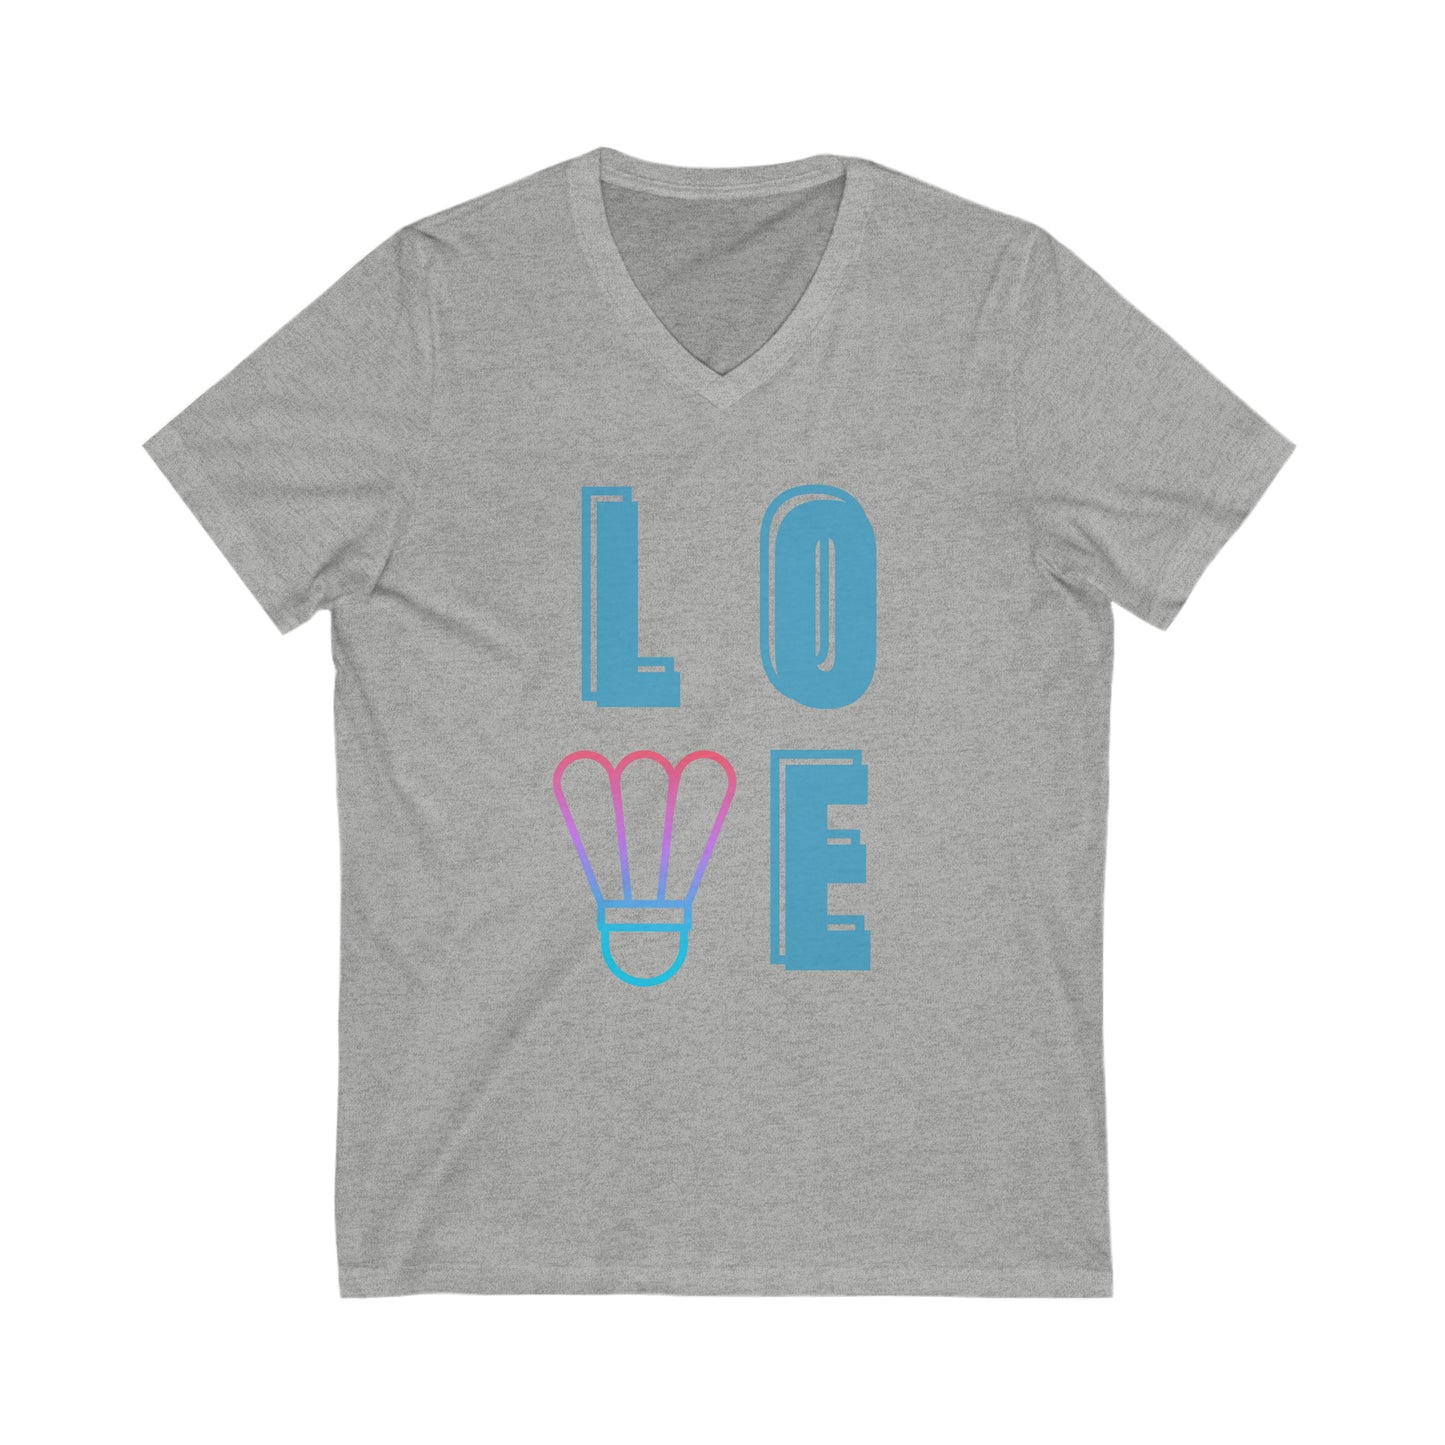 (Badminton) Love -Choose from a V-Neck or Hoodie!